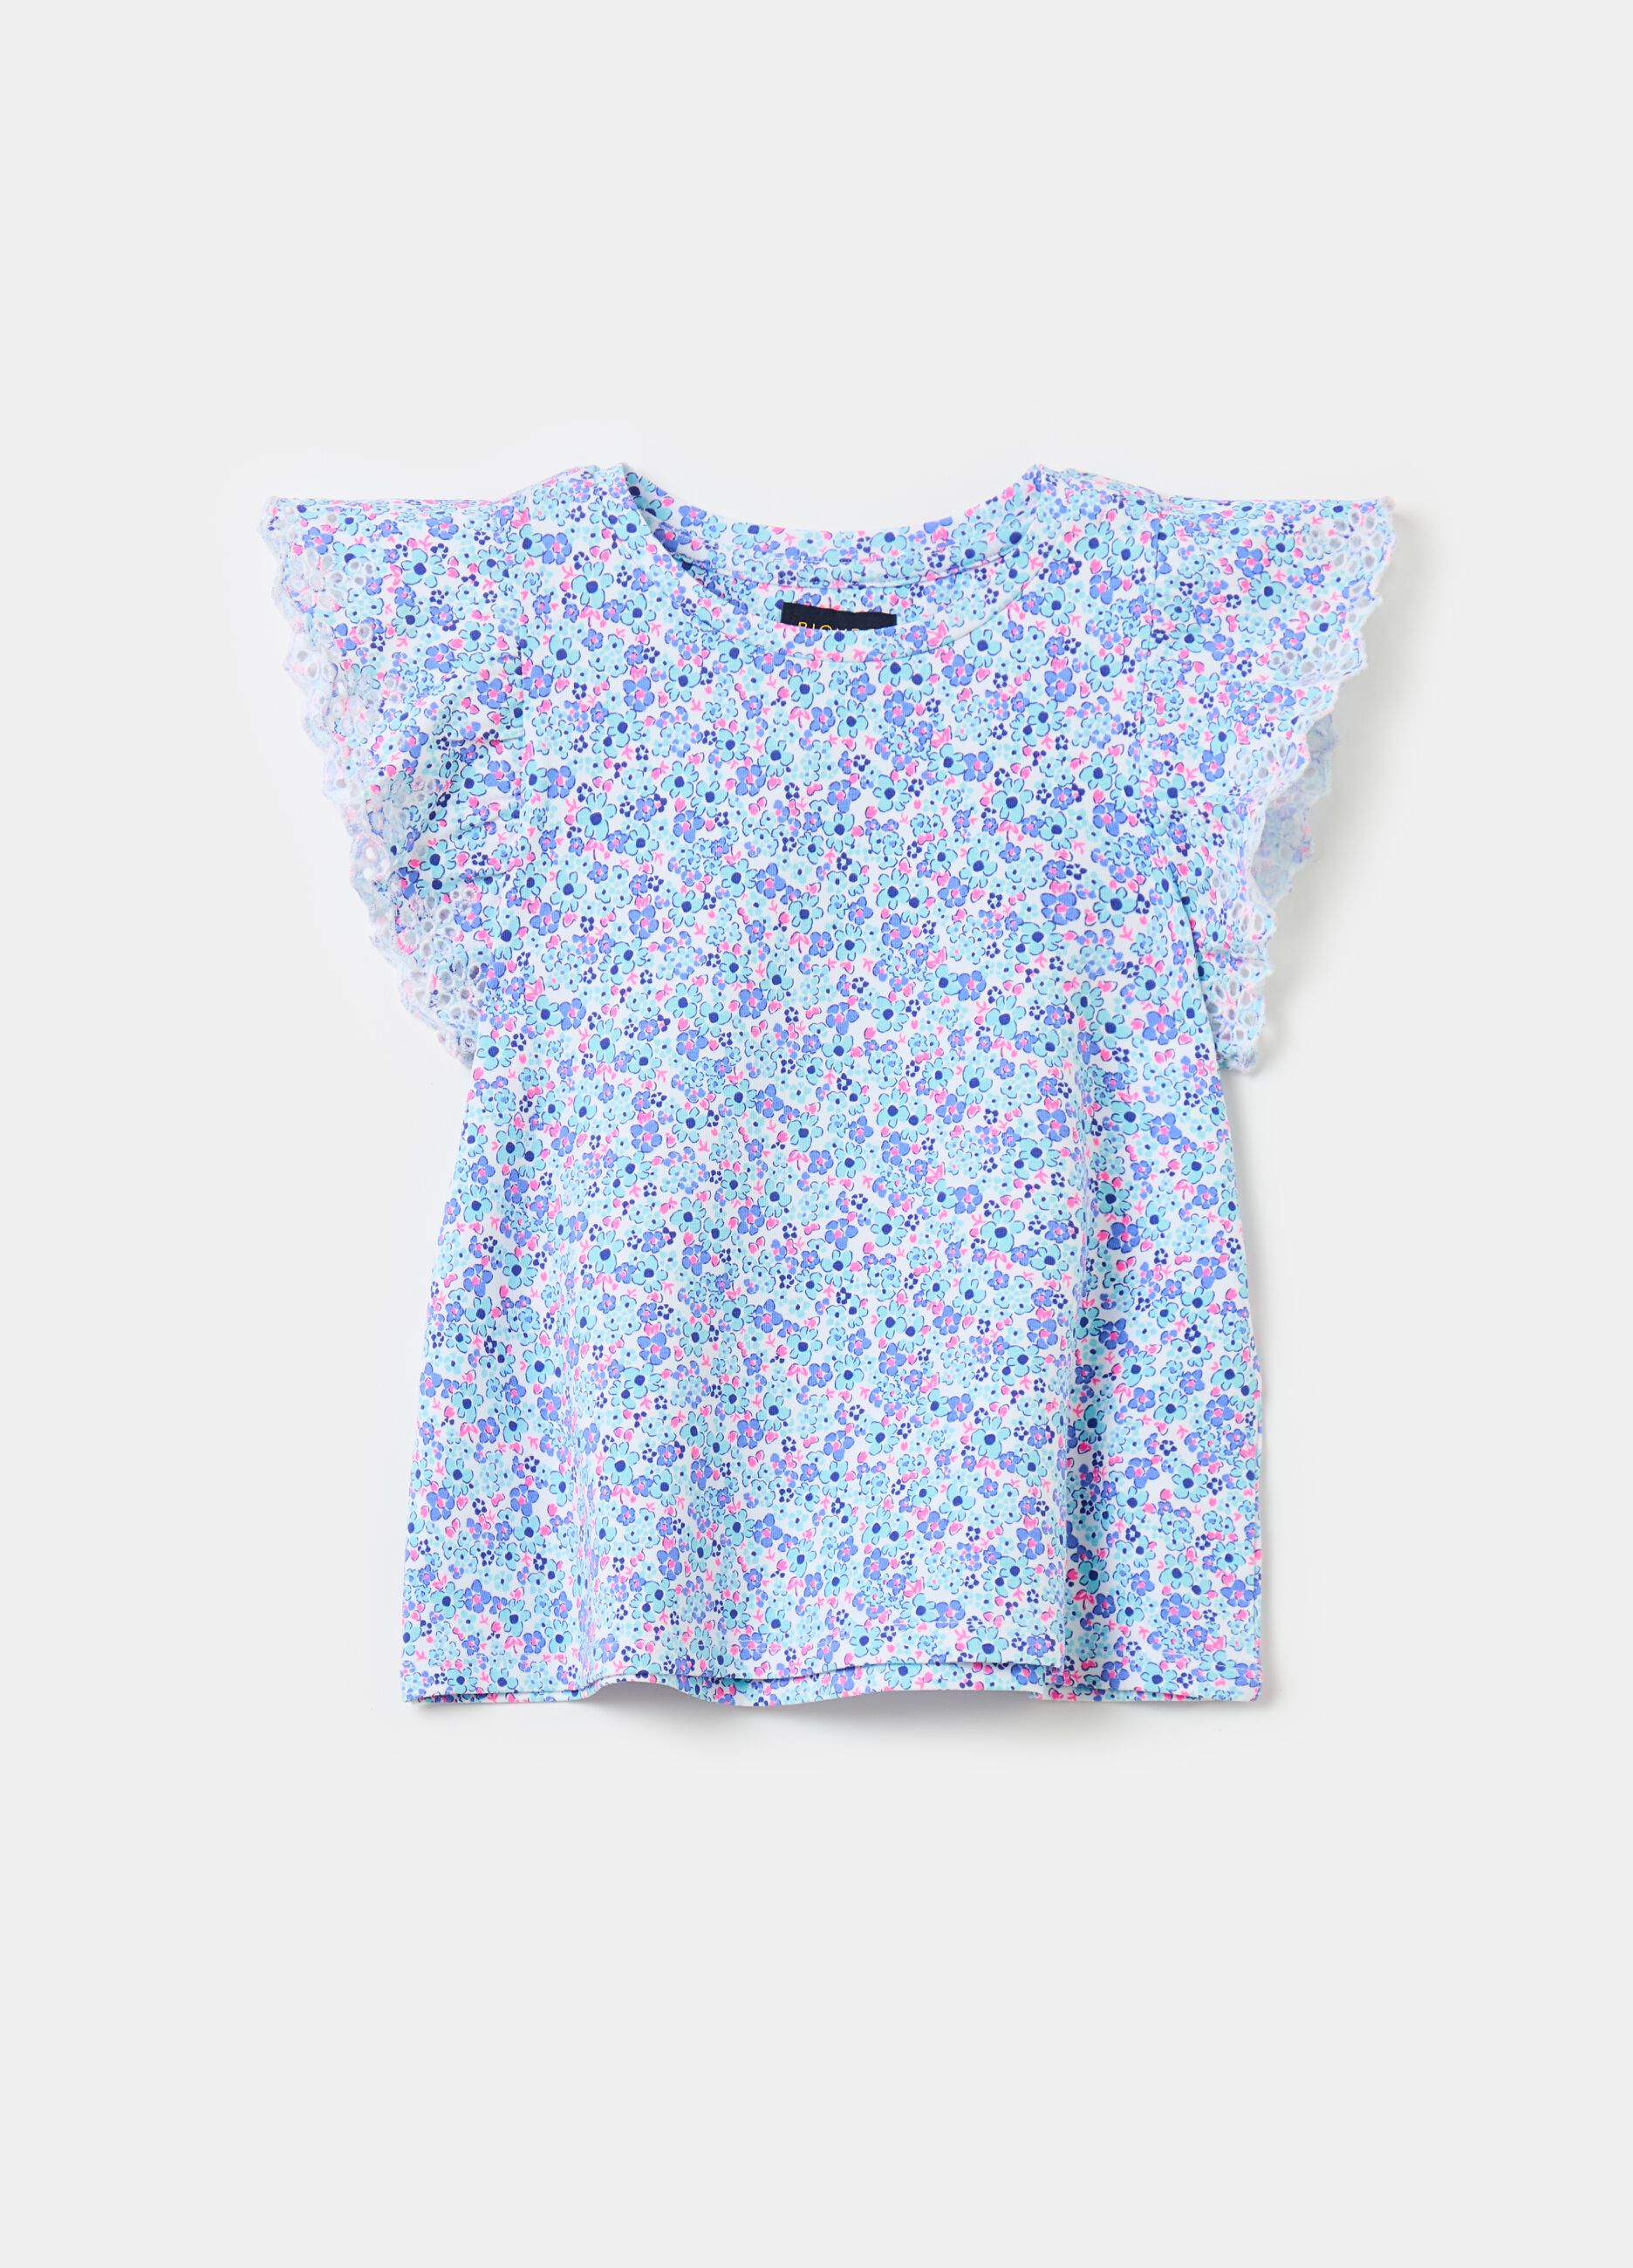 T-shirt with print and broderie anglaise embroidery